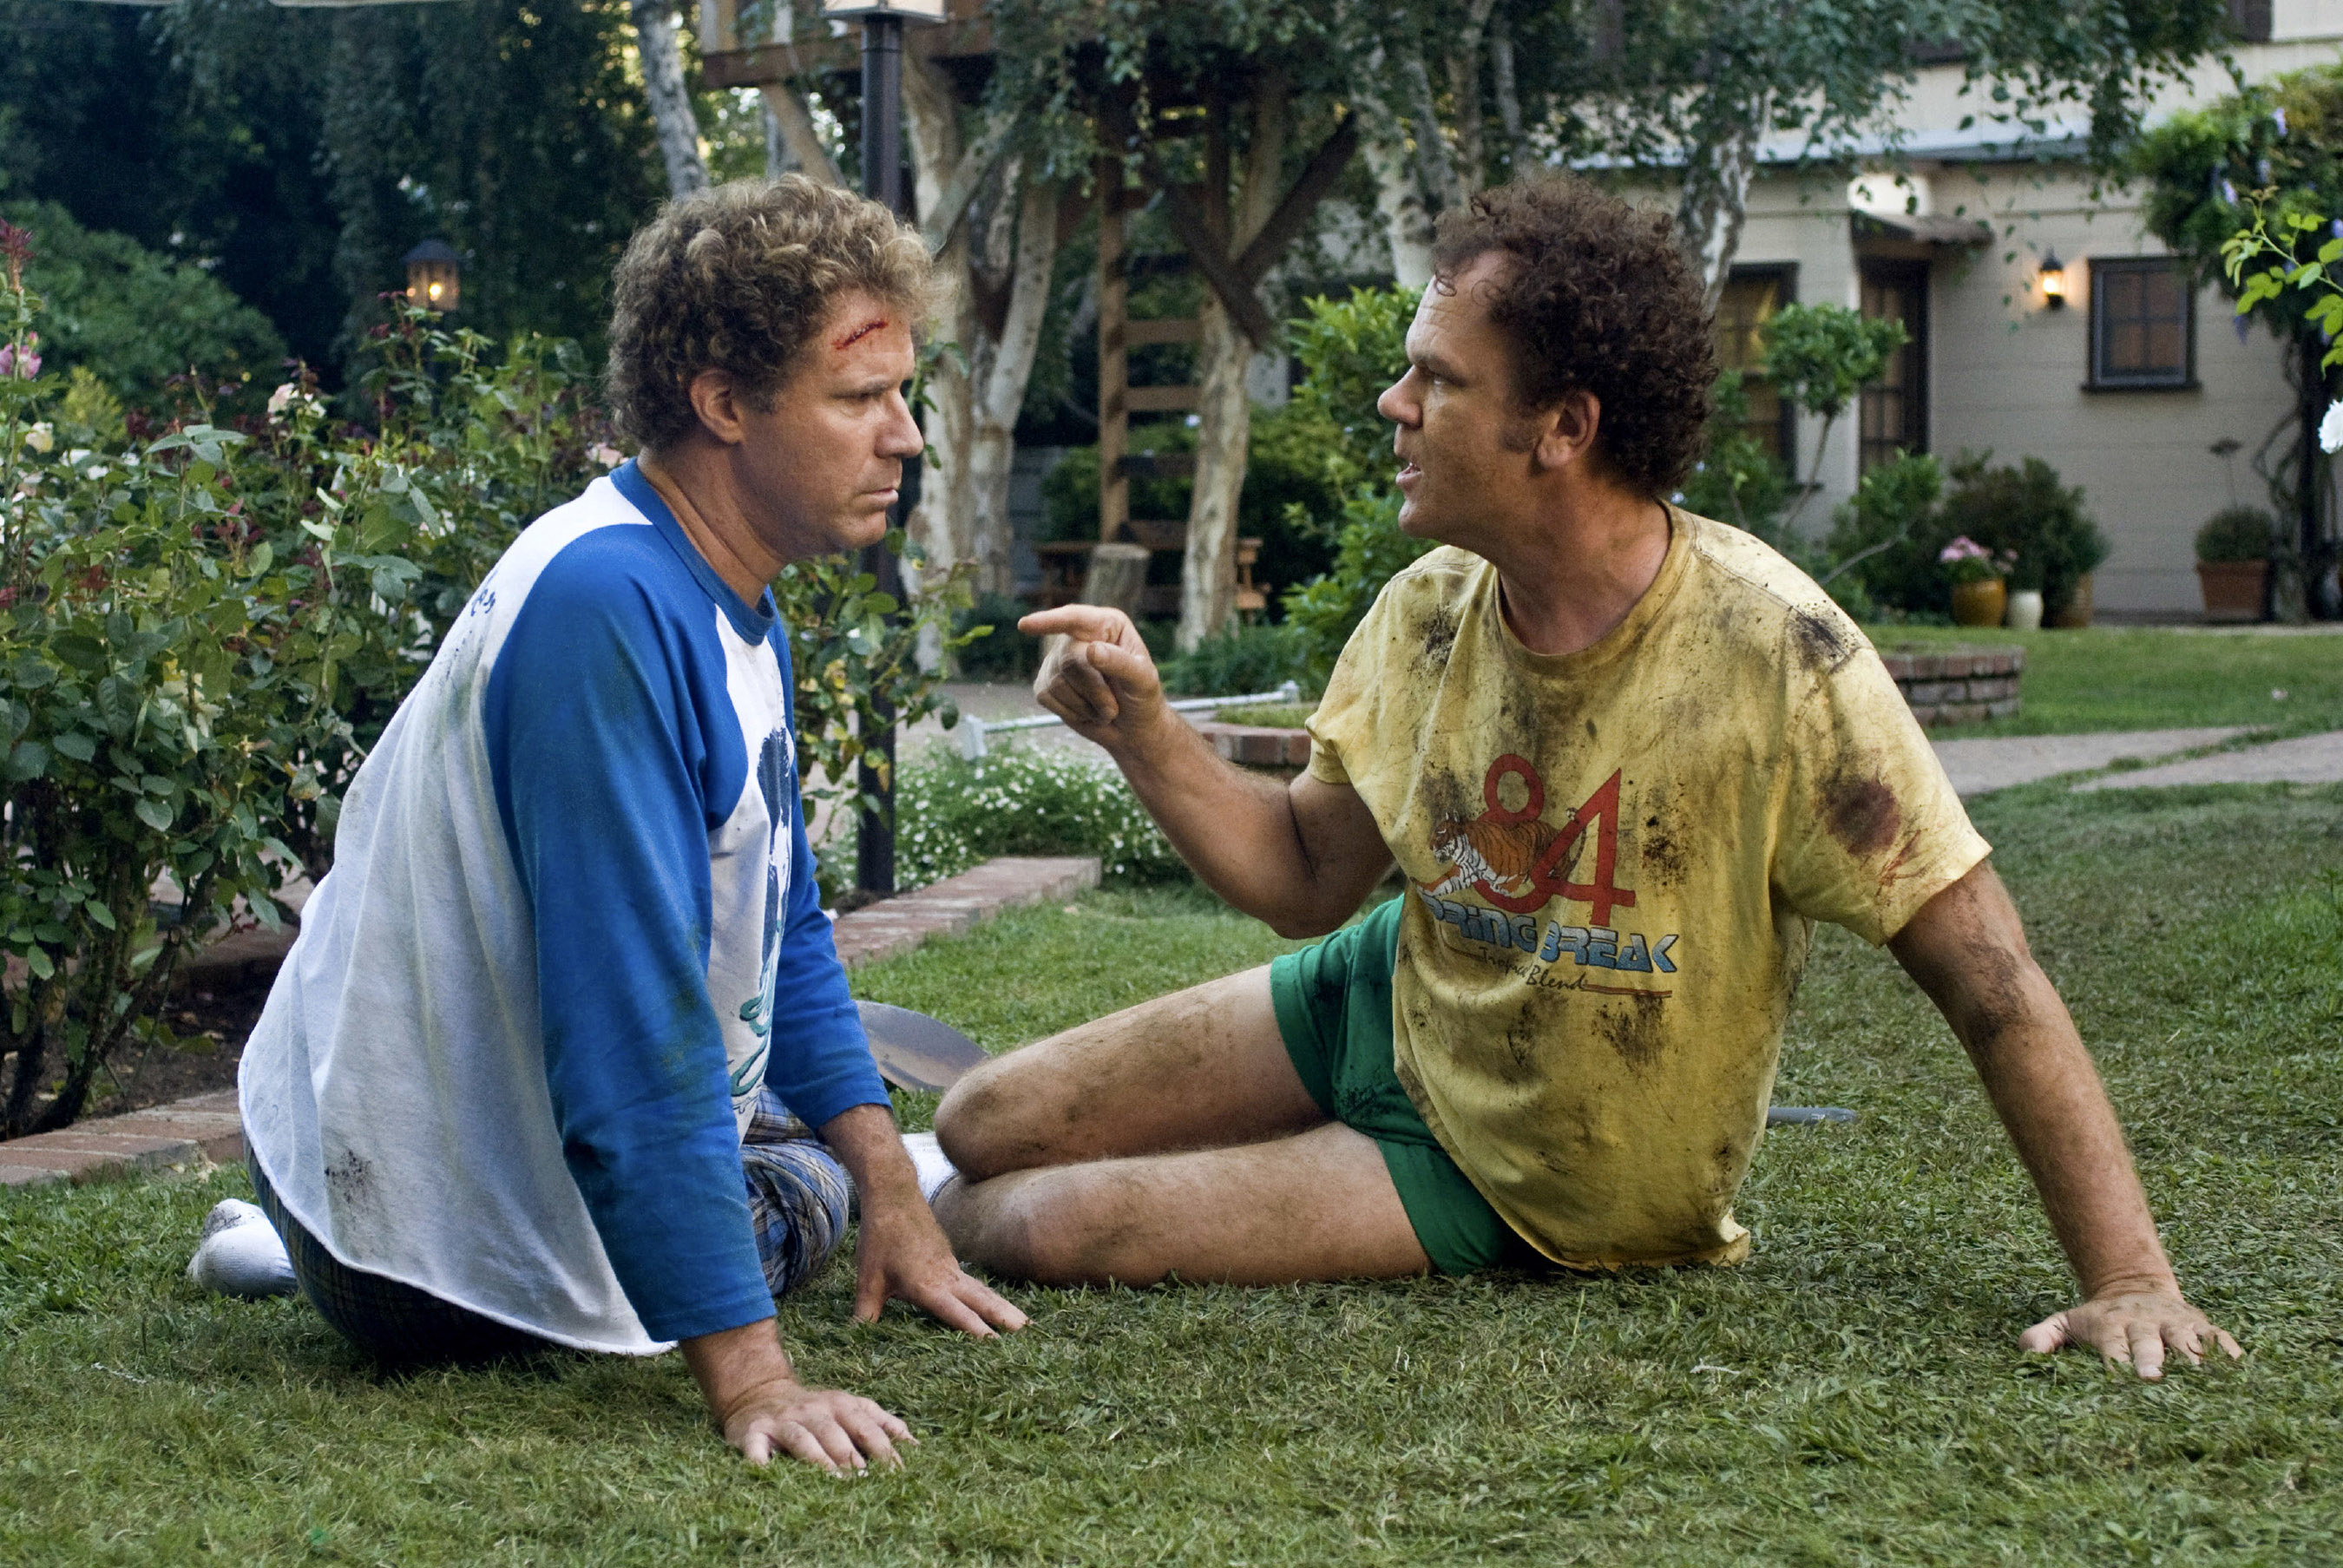 Will Ferrell and John C. Reilly are hilariously covered in dirt outside in &quot;Step Brothers&quot;